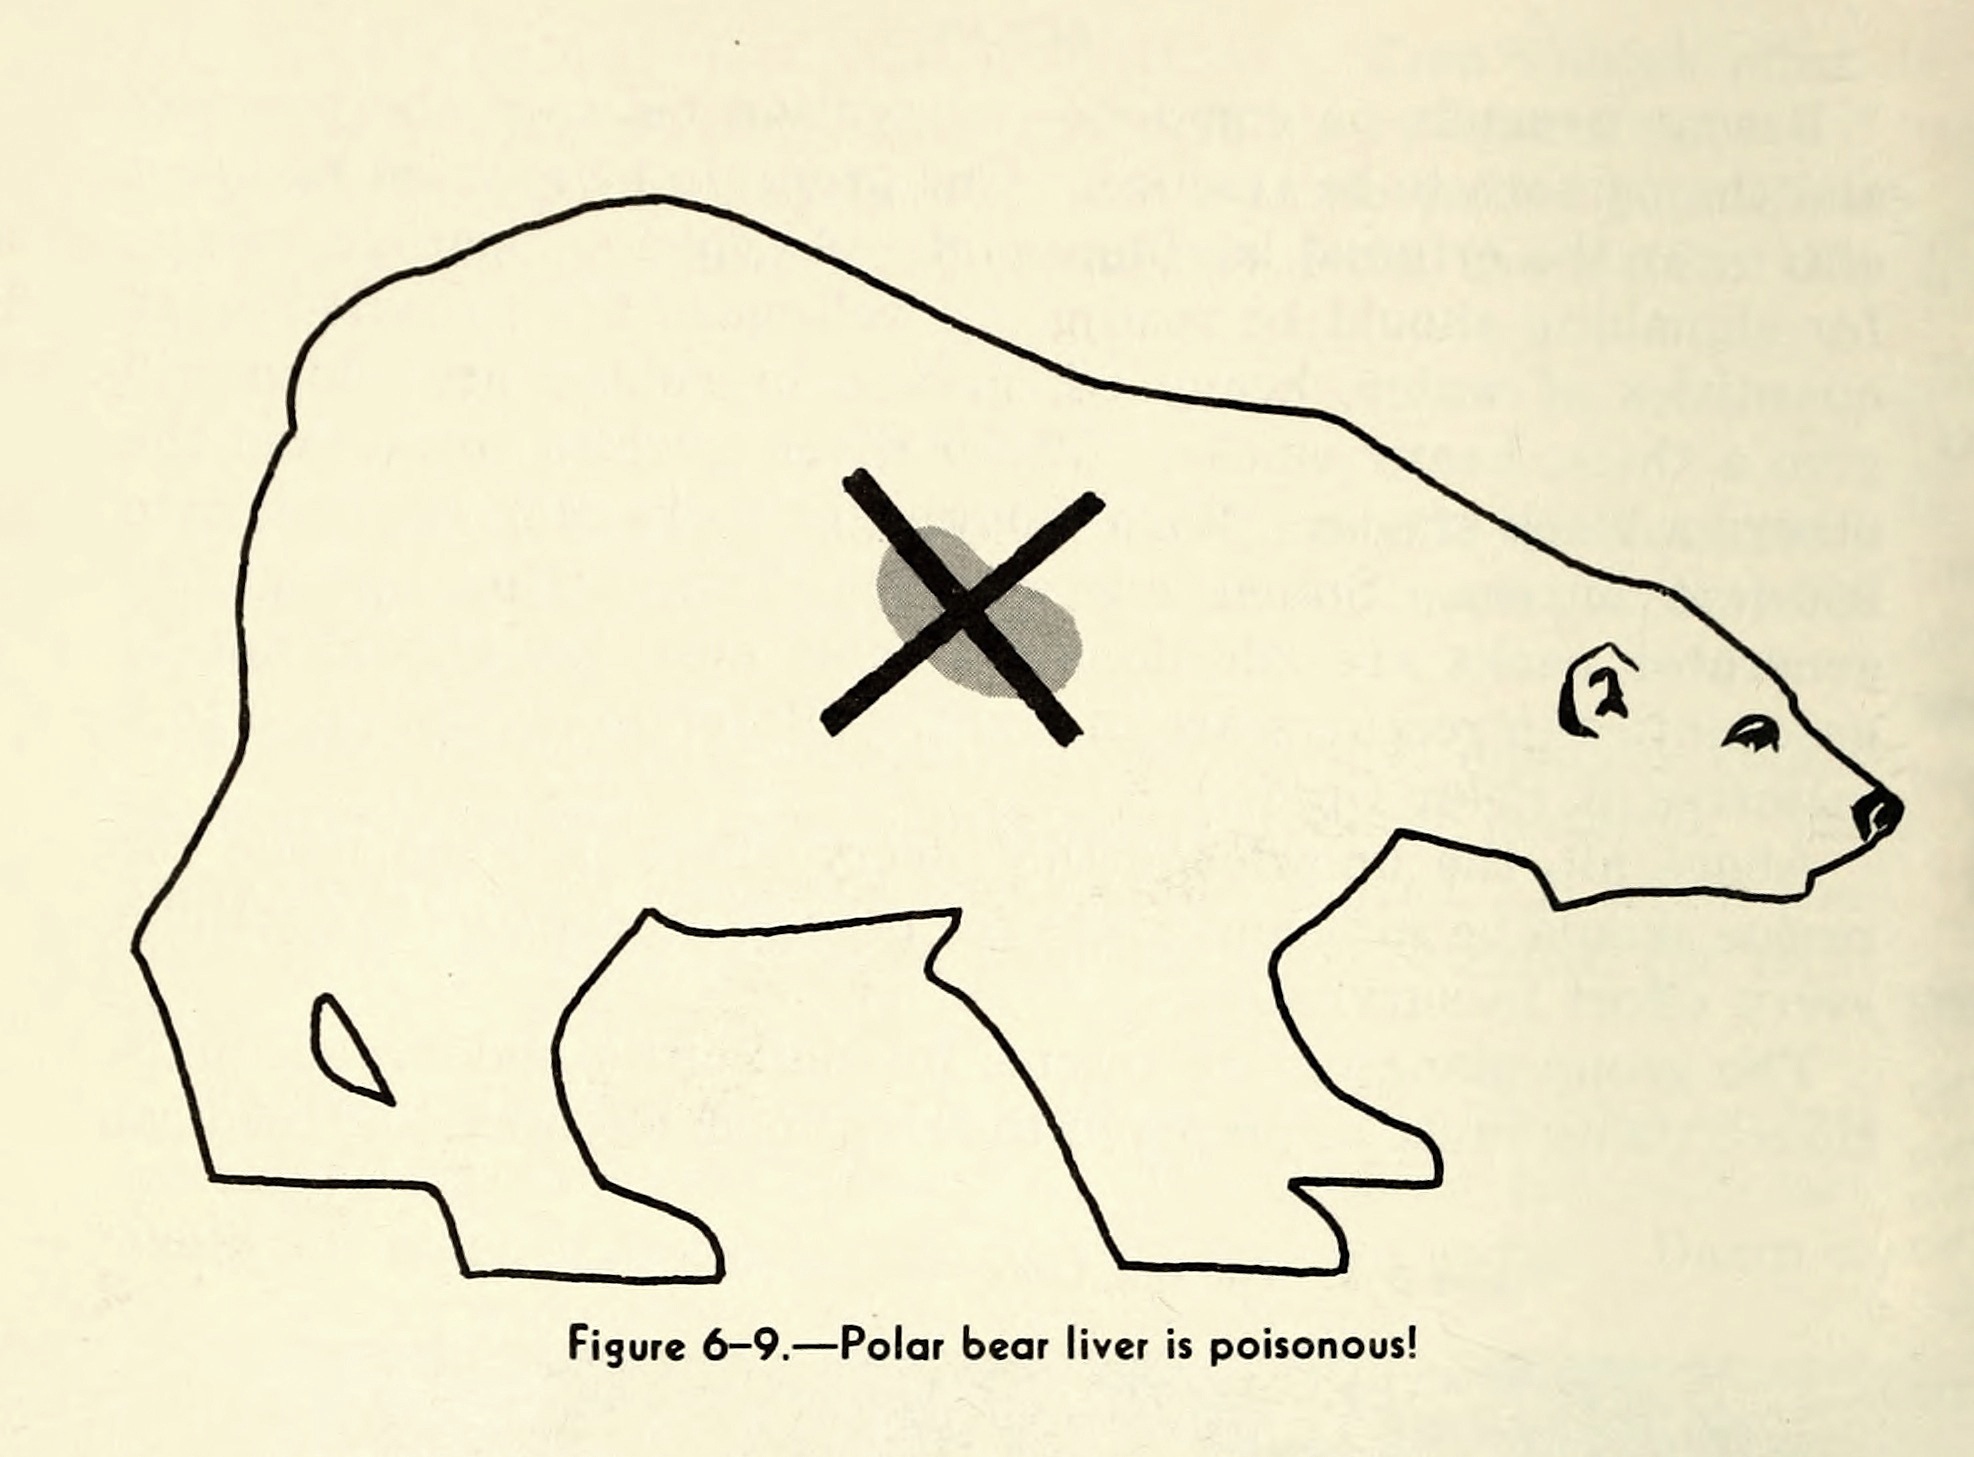 Warning against eating polar bear liver, from a U.S. Navy survival manual, The Naval Arctic Operations Handbook, 1949. The organ has concentrations of vitamin A that are toxic for humans. (Courtesy of Woods Hole Oceanographic Institution.) 